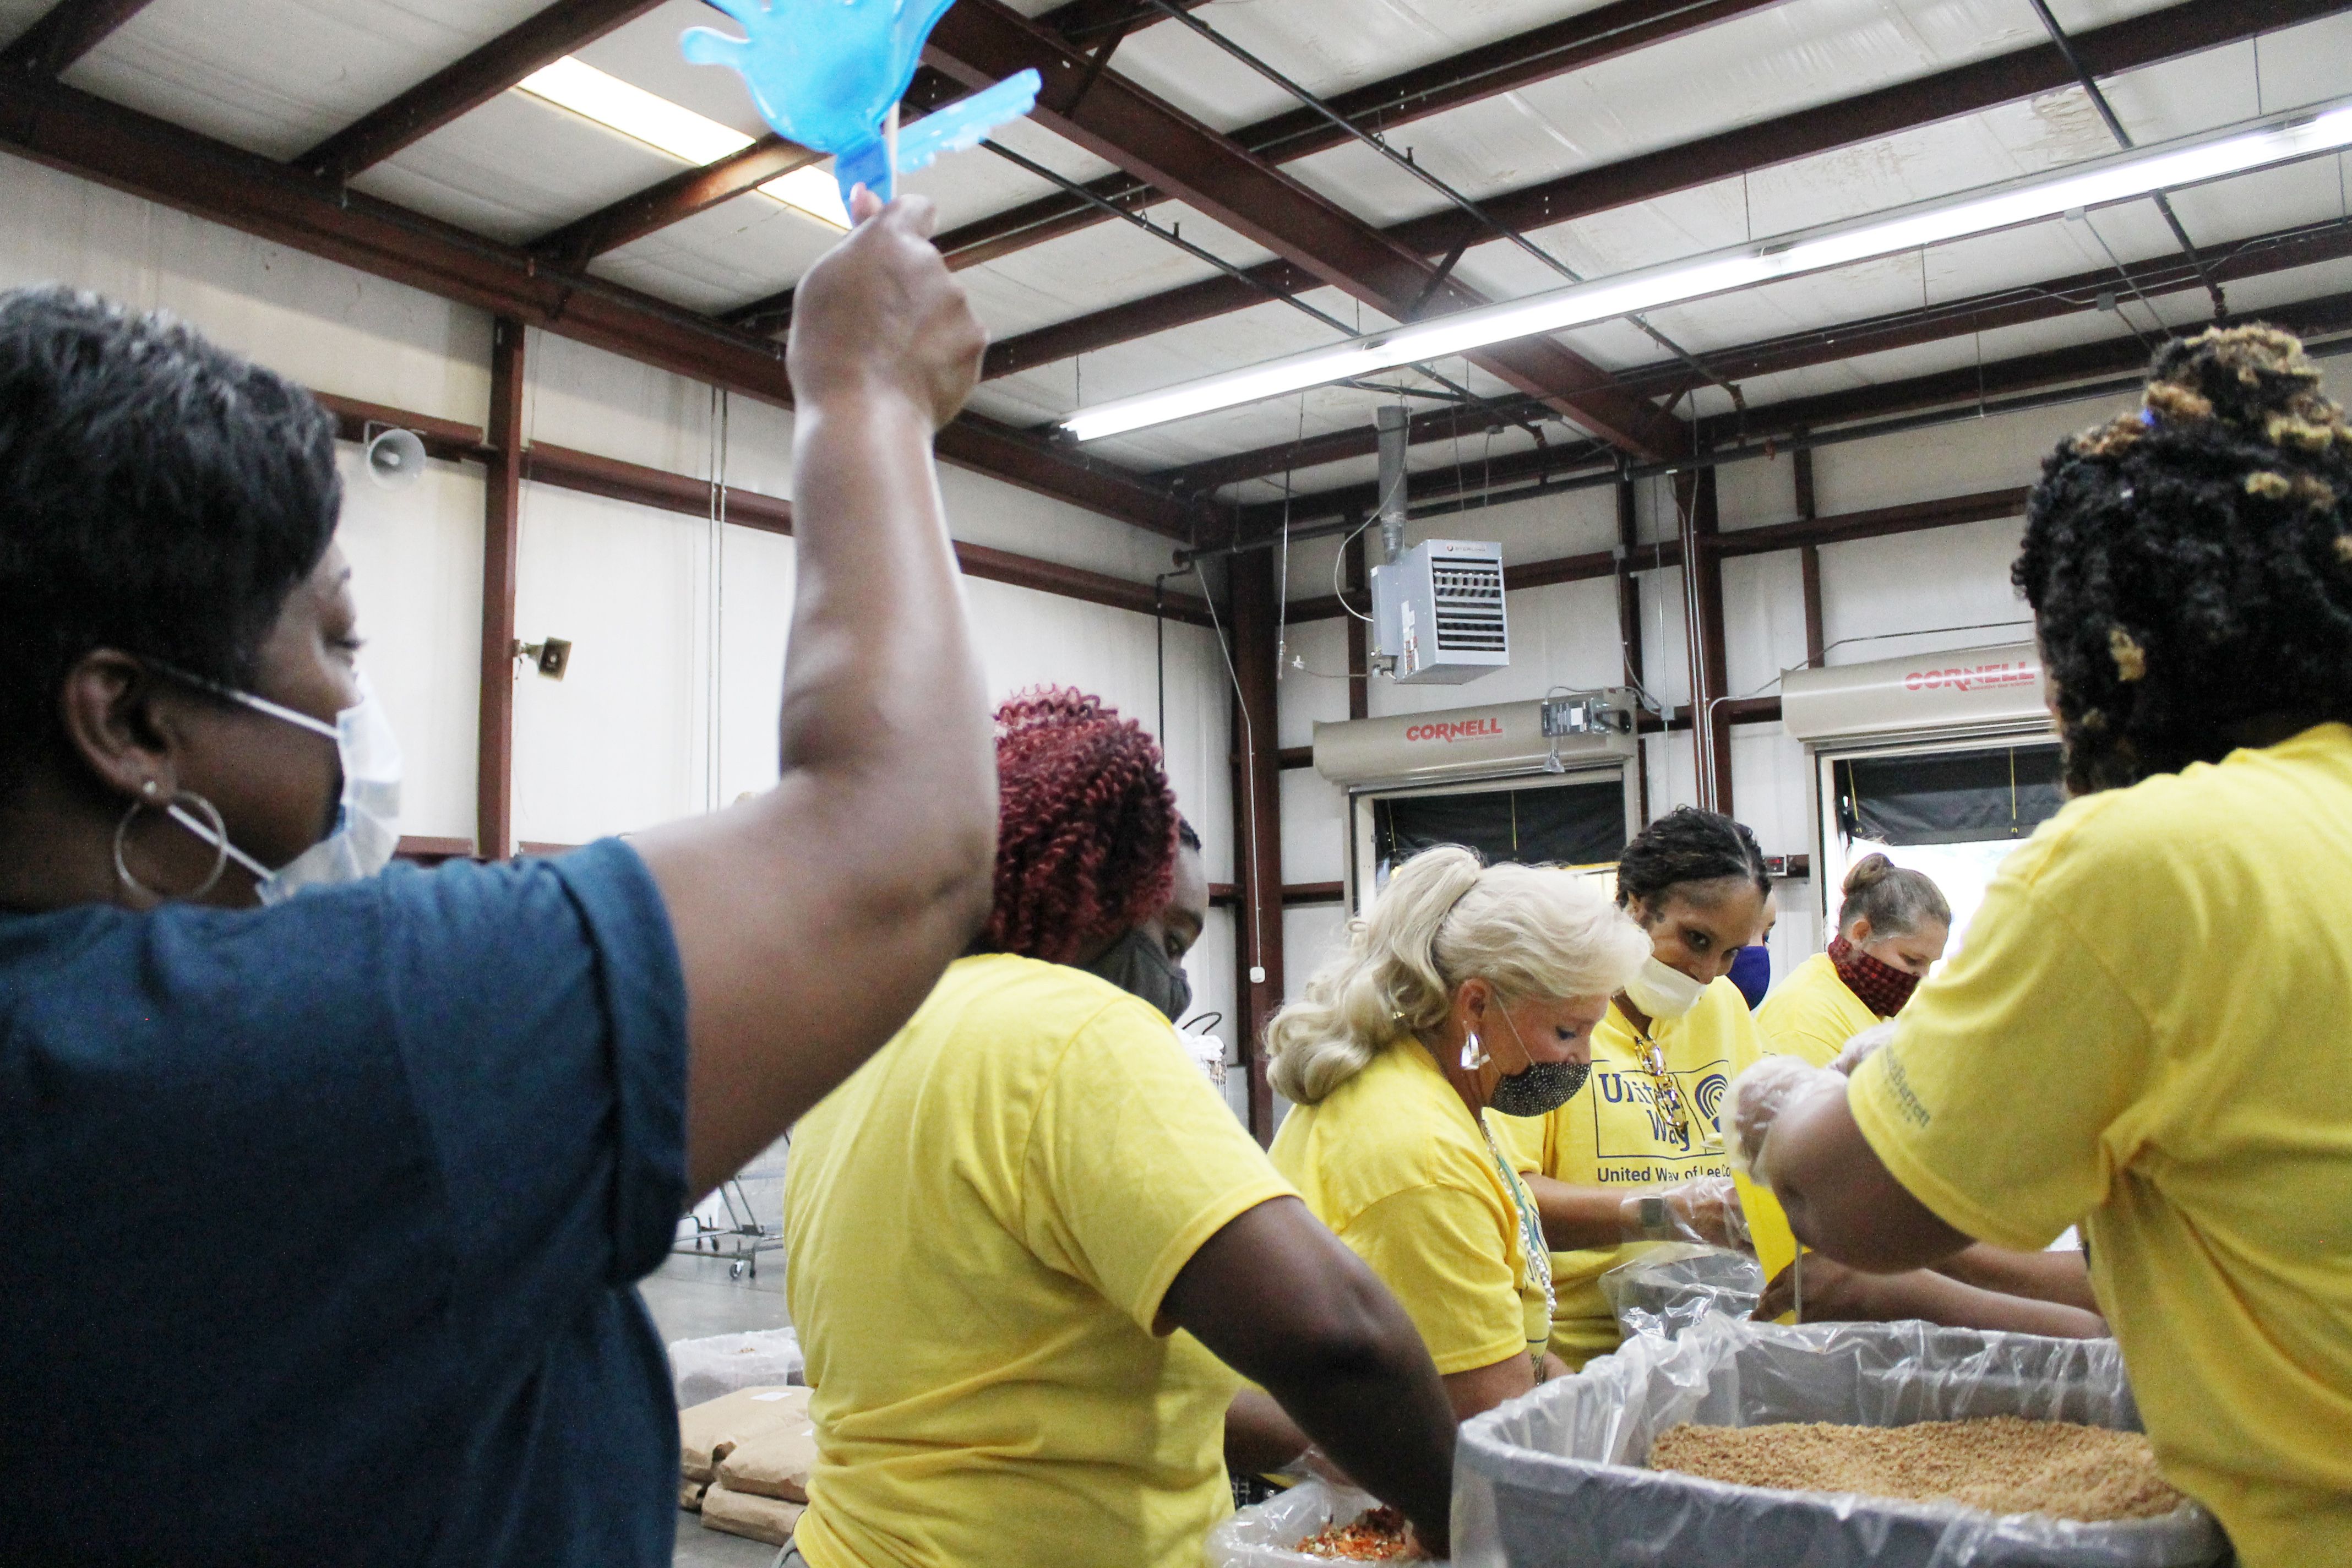 Volunteers packing food while the lead cheers them on